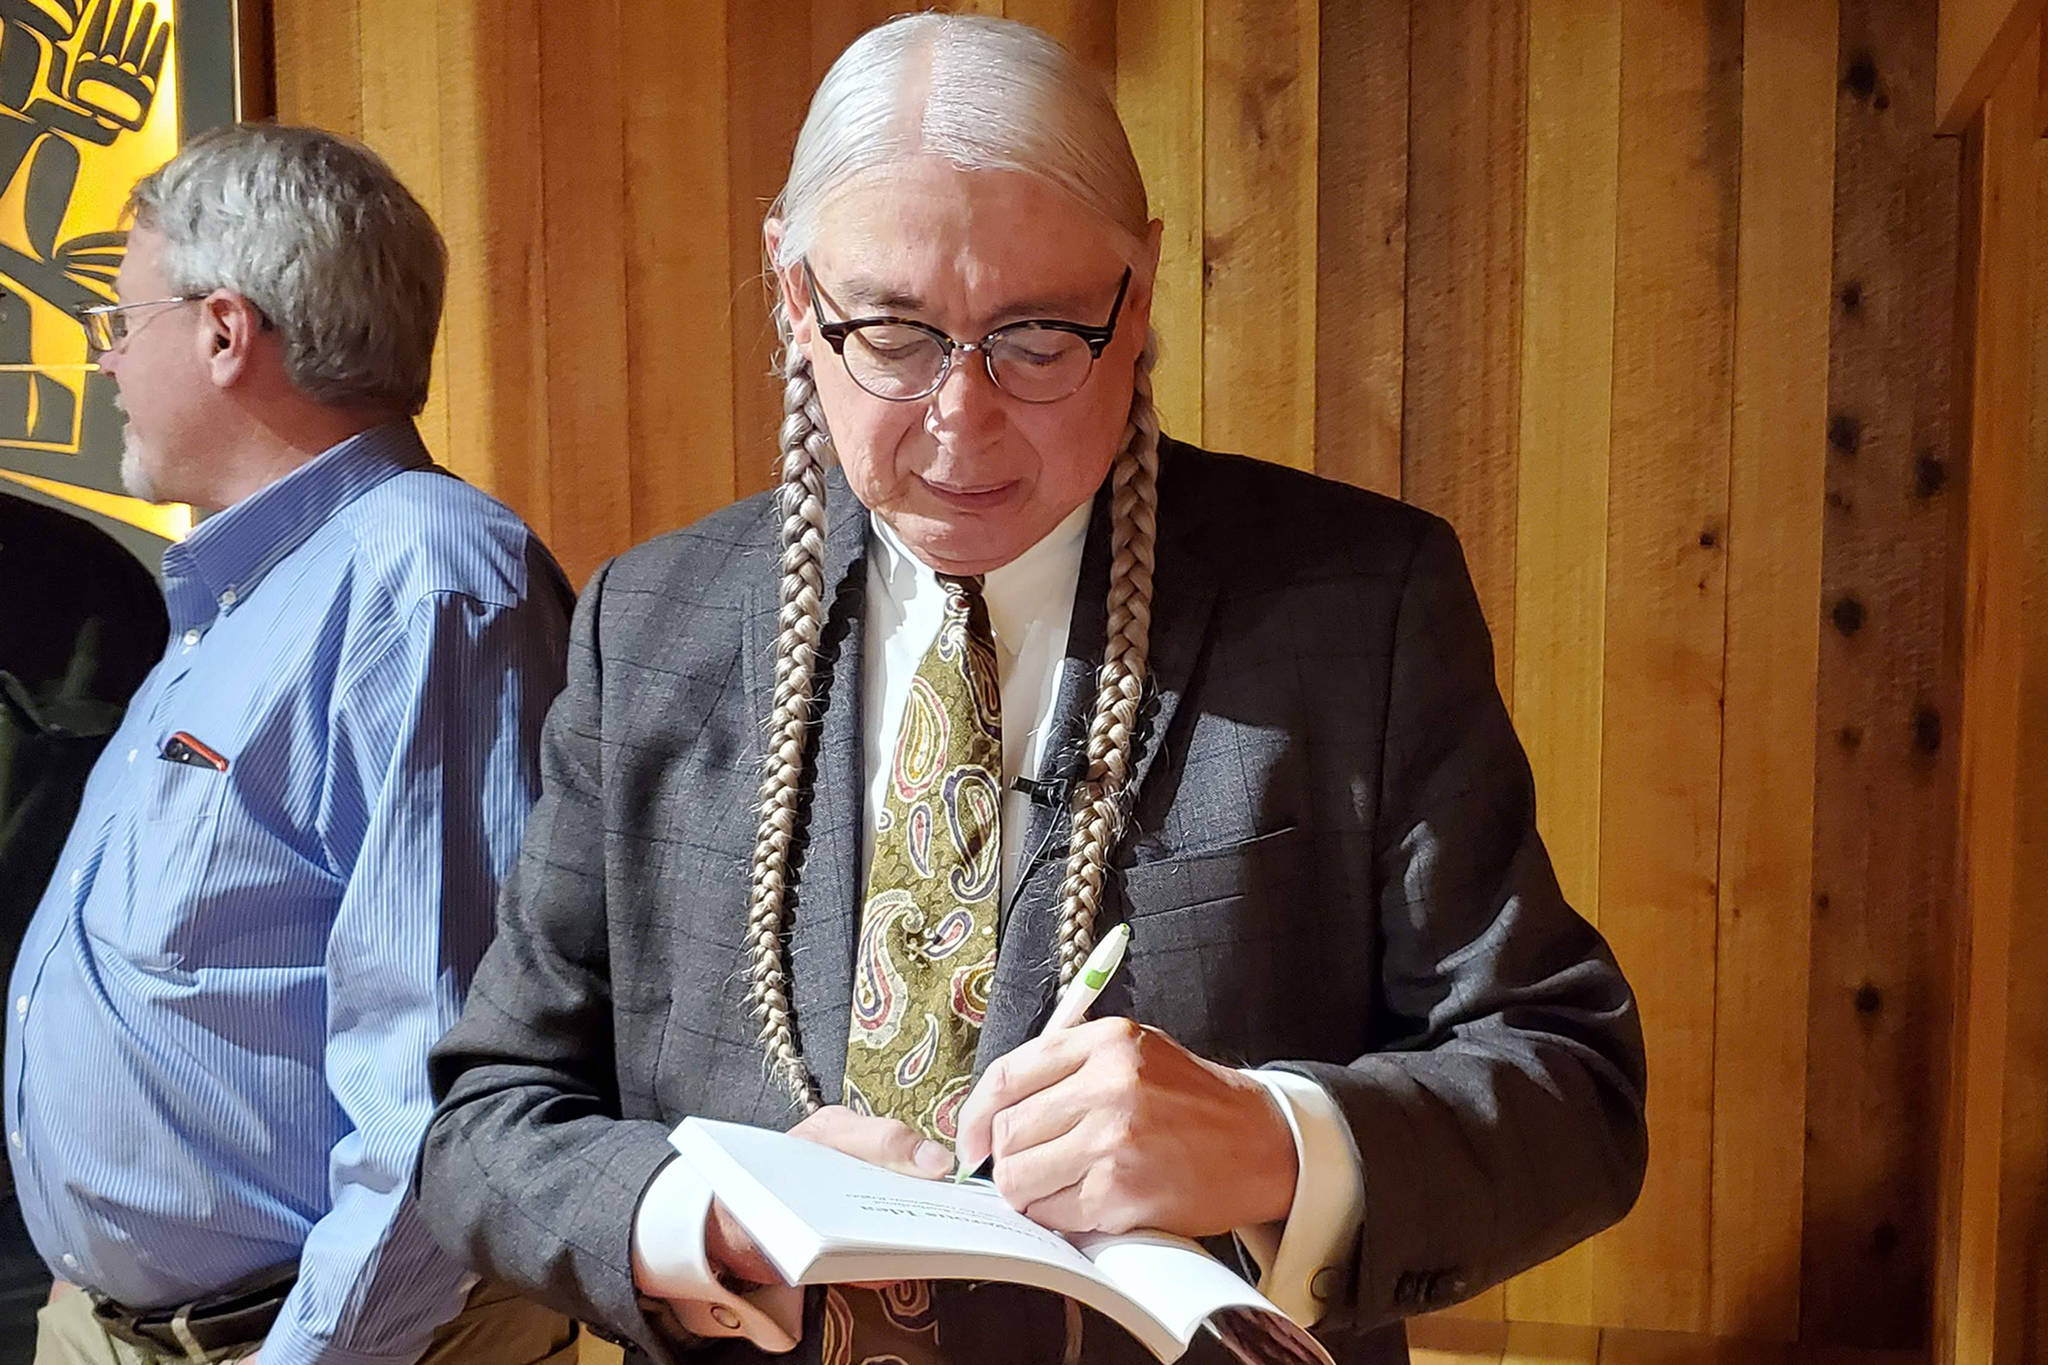 Walter Echo-Hawk, a speaker, attorney and author, signs a book after discussing the Tee-Hit-Ton v. United States case during a lecture at Sealaska Heritage Institute’s Walter Soboleff building Thursday, Nov. 7, 2019. (Ben Hohenstatt | Juneau Empire)